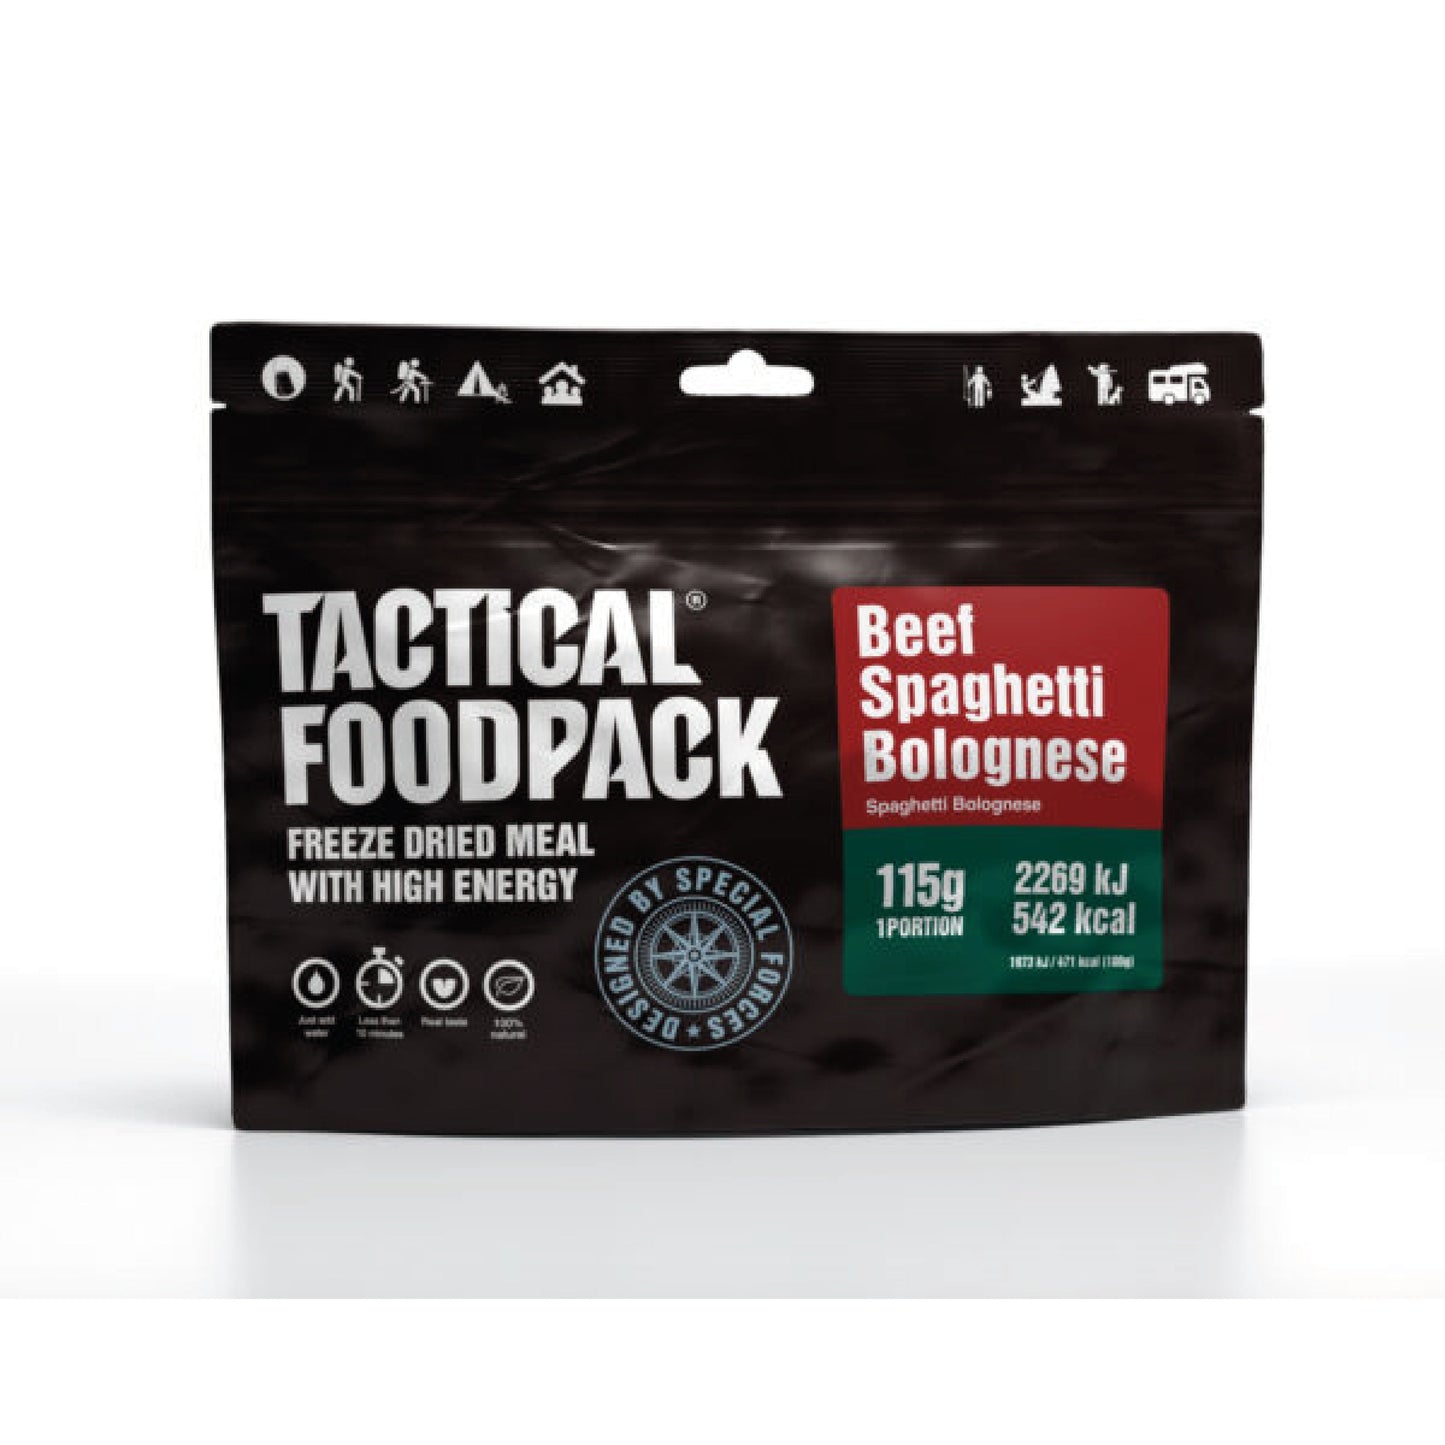 TACTICAL FOODPACK® Spaghetti Bolognese 115g